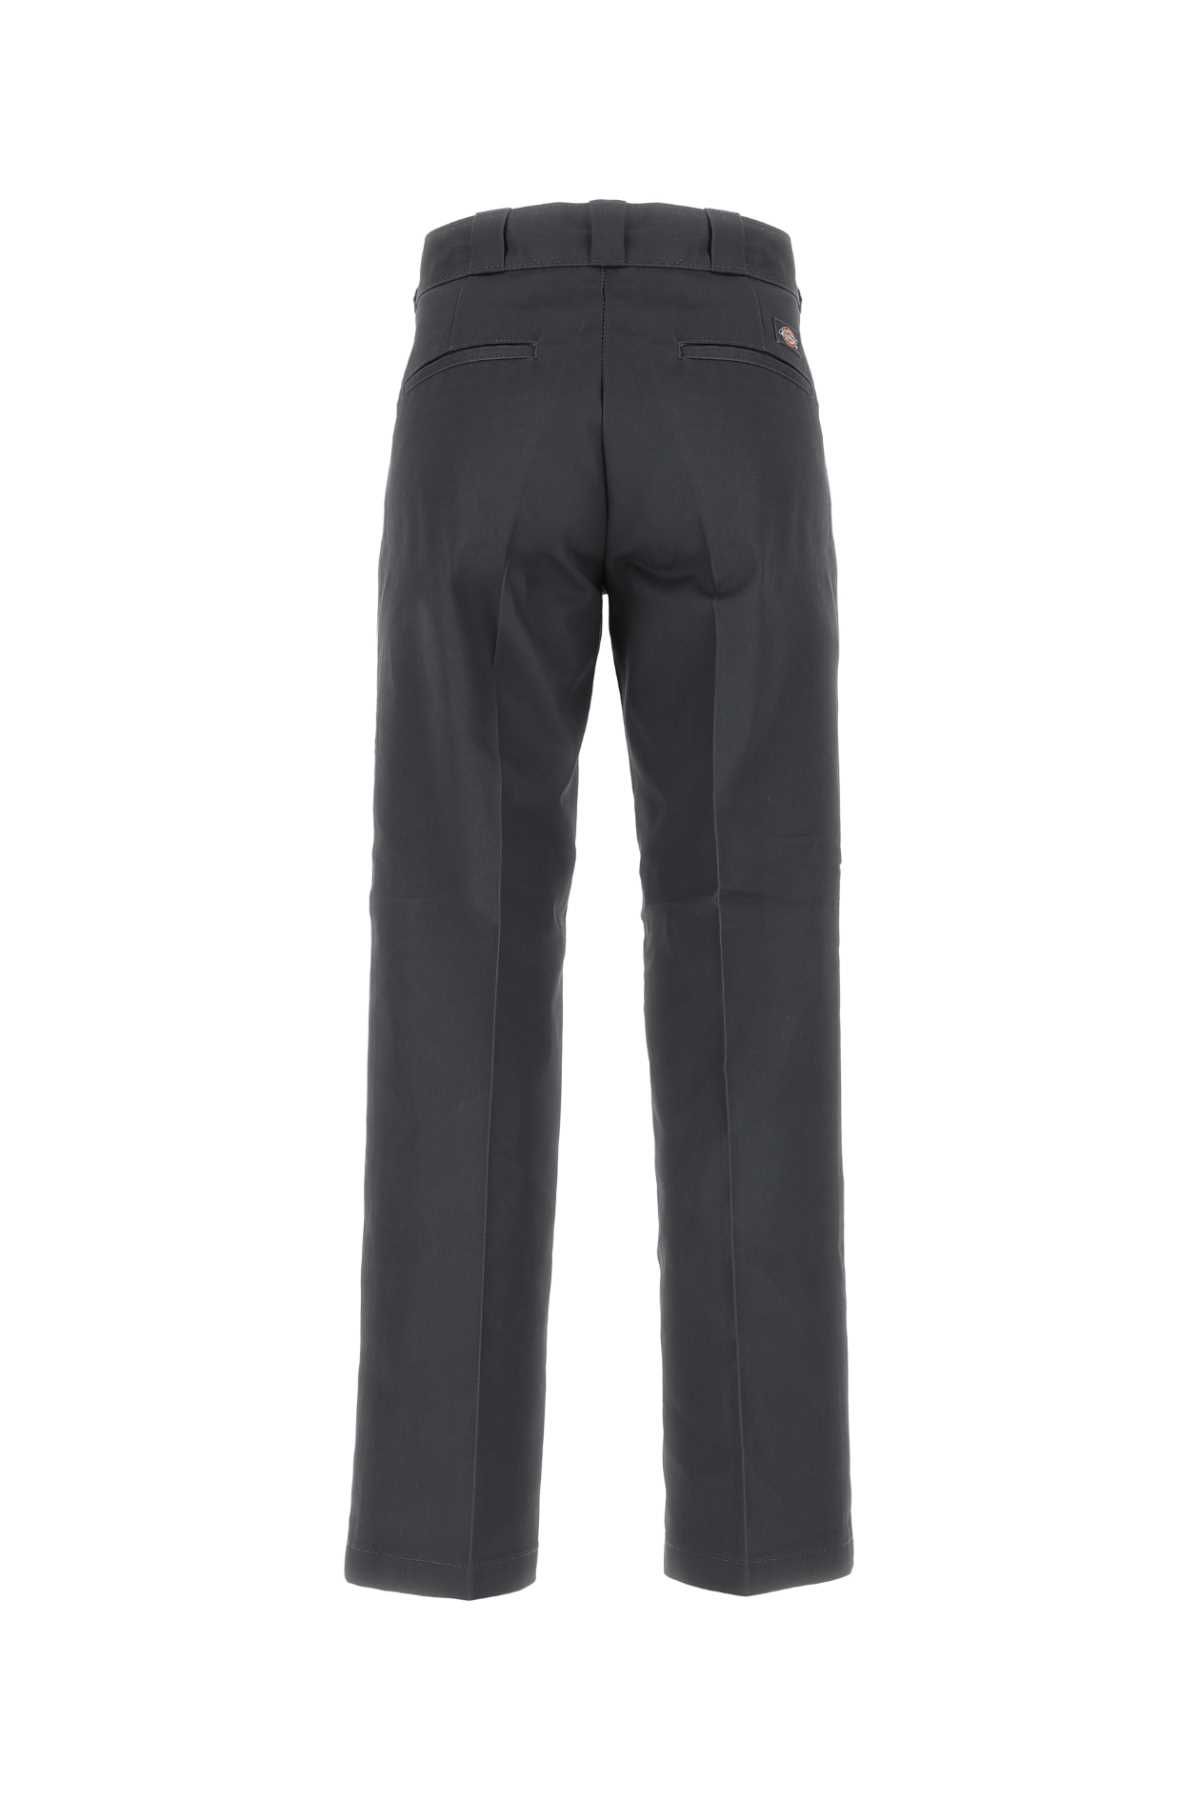 Shop Dickies Dark Grey Polyester Blend Pant In Charcoalgrey